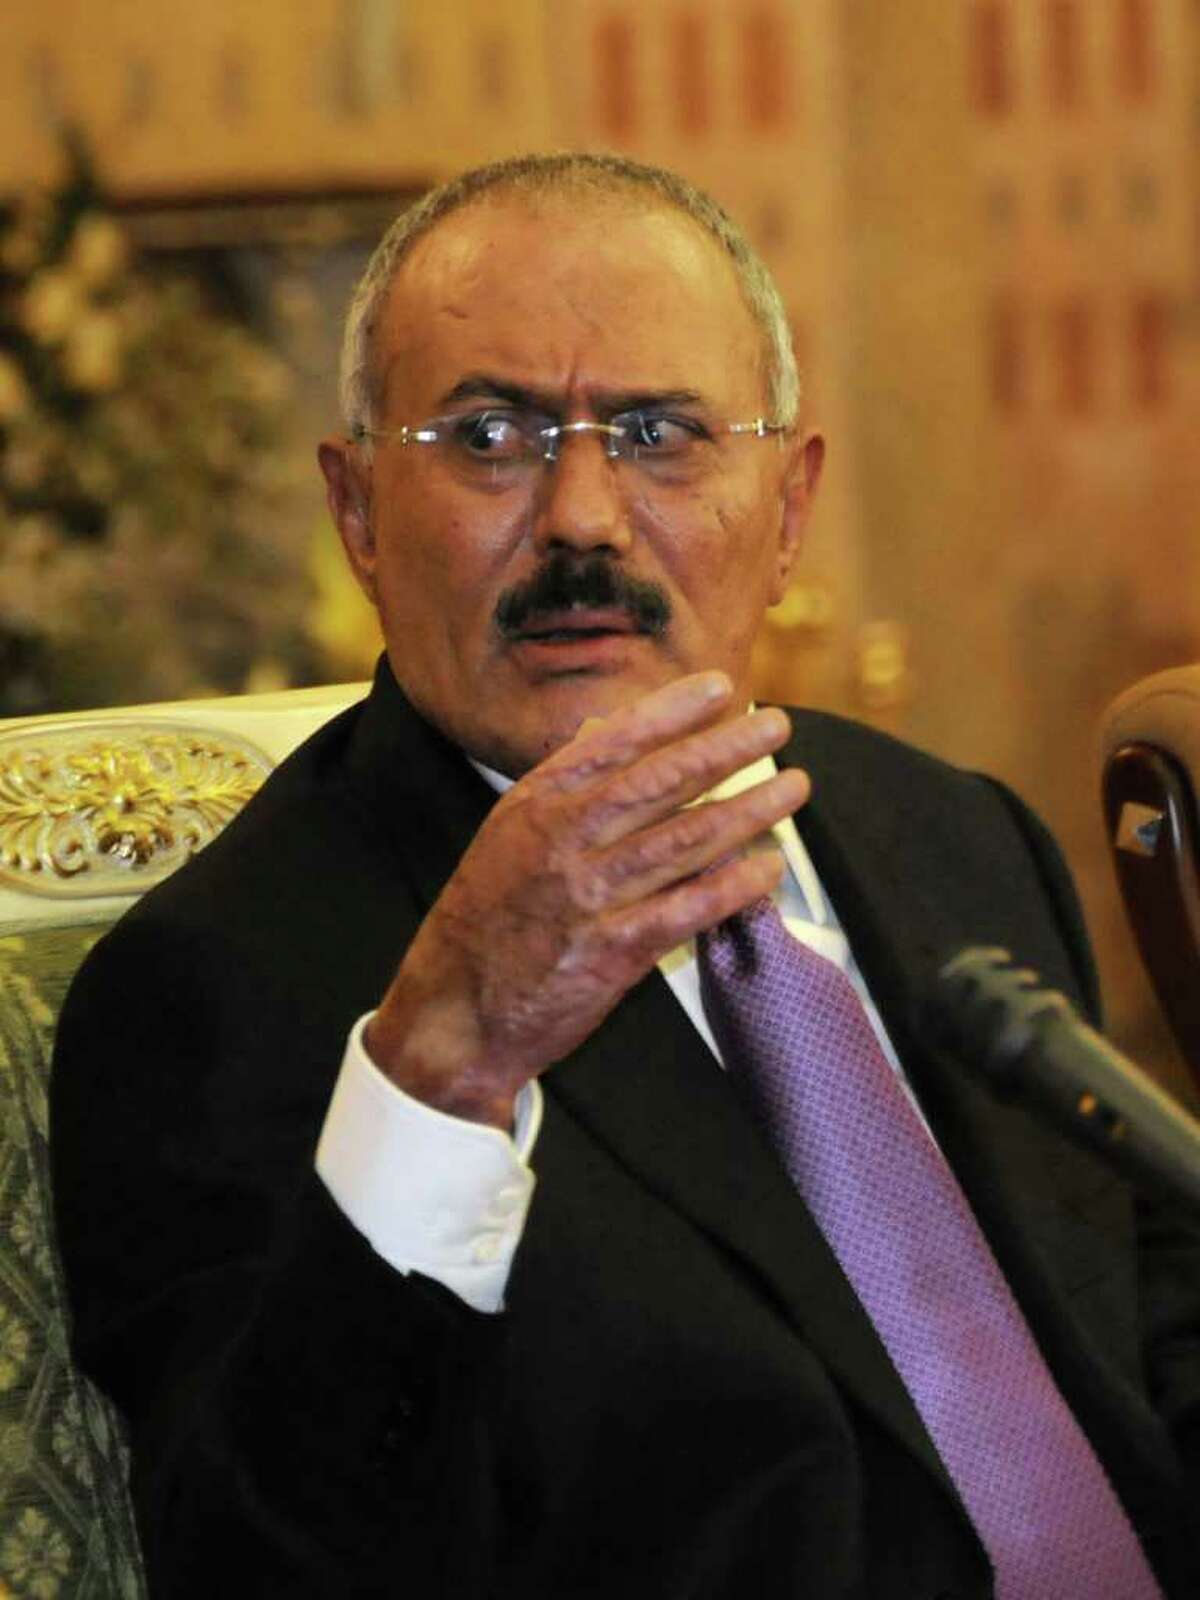 FILE - In this Saturday, Dec. 24, 2011 file photo, Yemen's President Ali Abdullah Saleh speaks to reporters during a news conference at the Presidential Palace in Sanaa, Yemen. Yemen's President's office says Yemeni leader Saleh has arrived in London en route to the U.S. (AP Photo/Mohammed Hamoud, File)